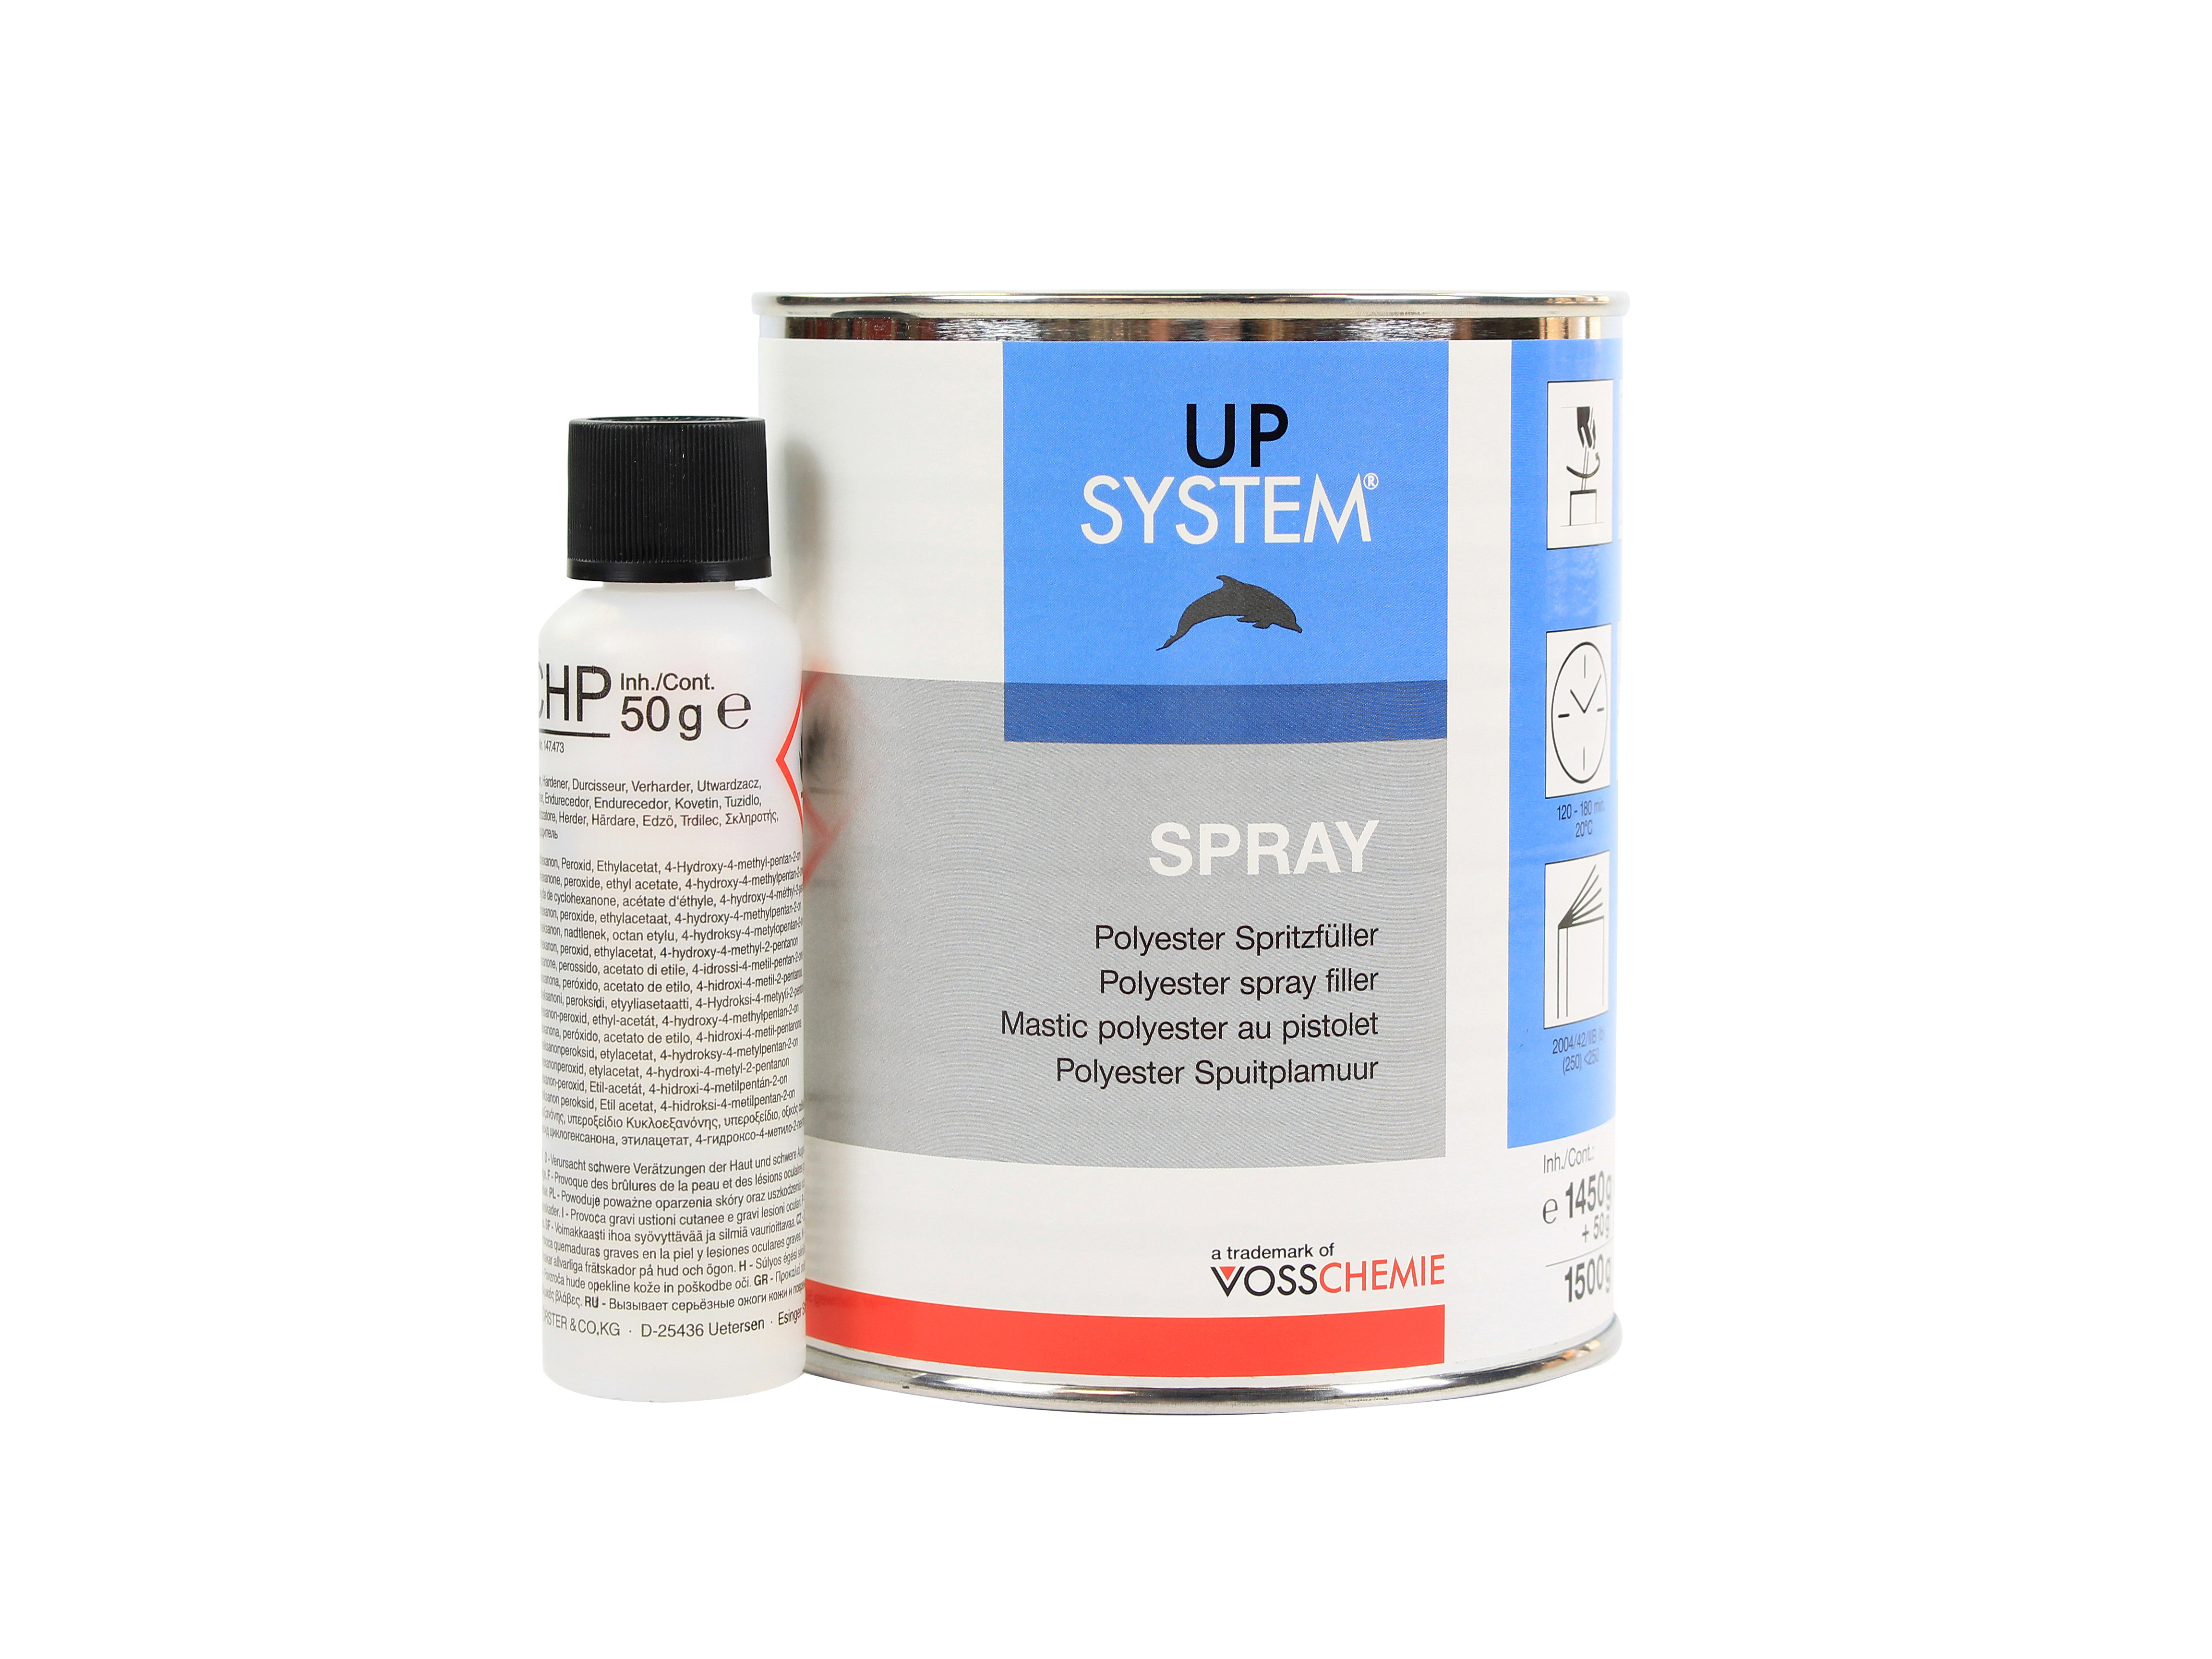 Polyester spray putty - For fine finishing and filling